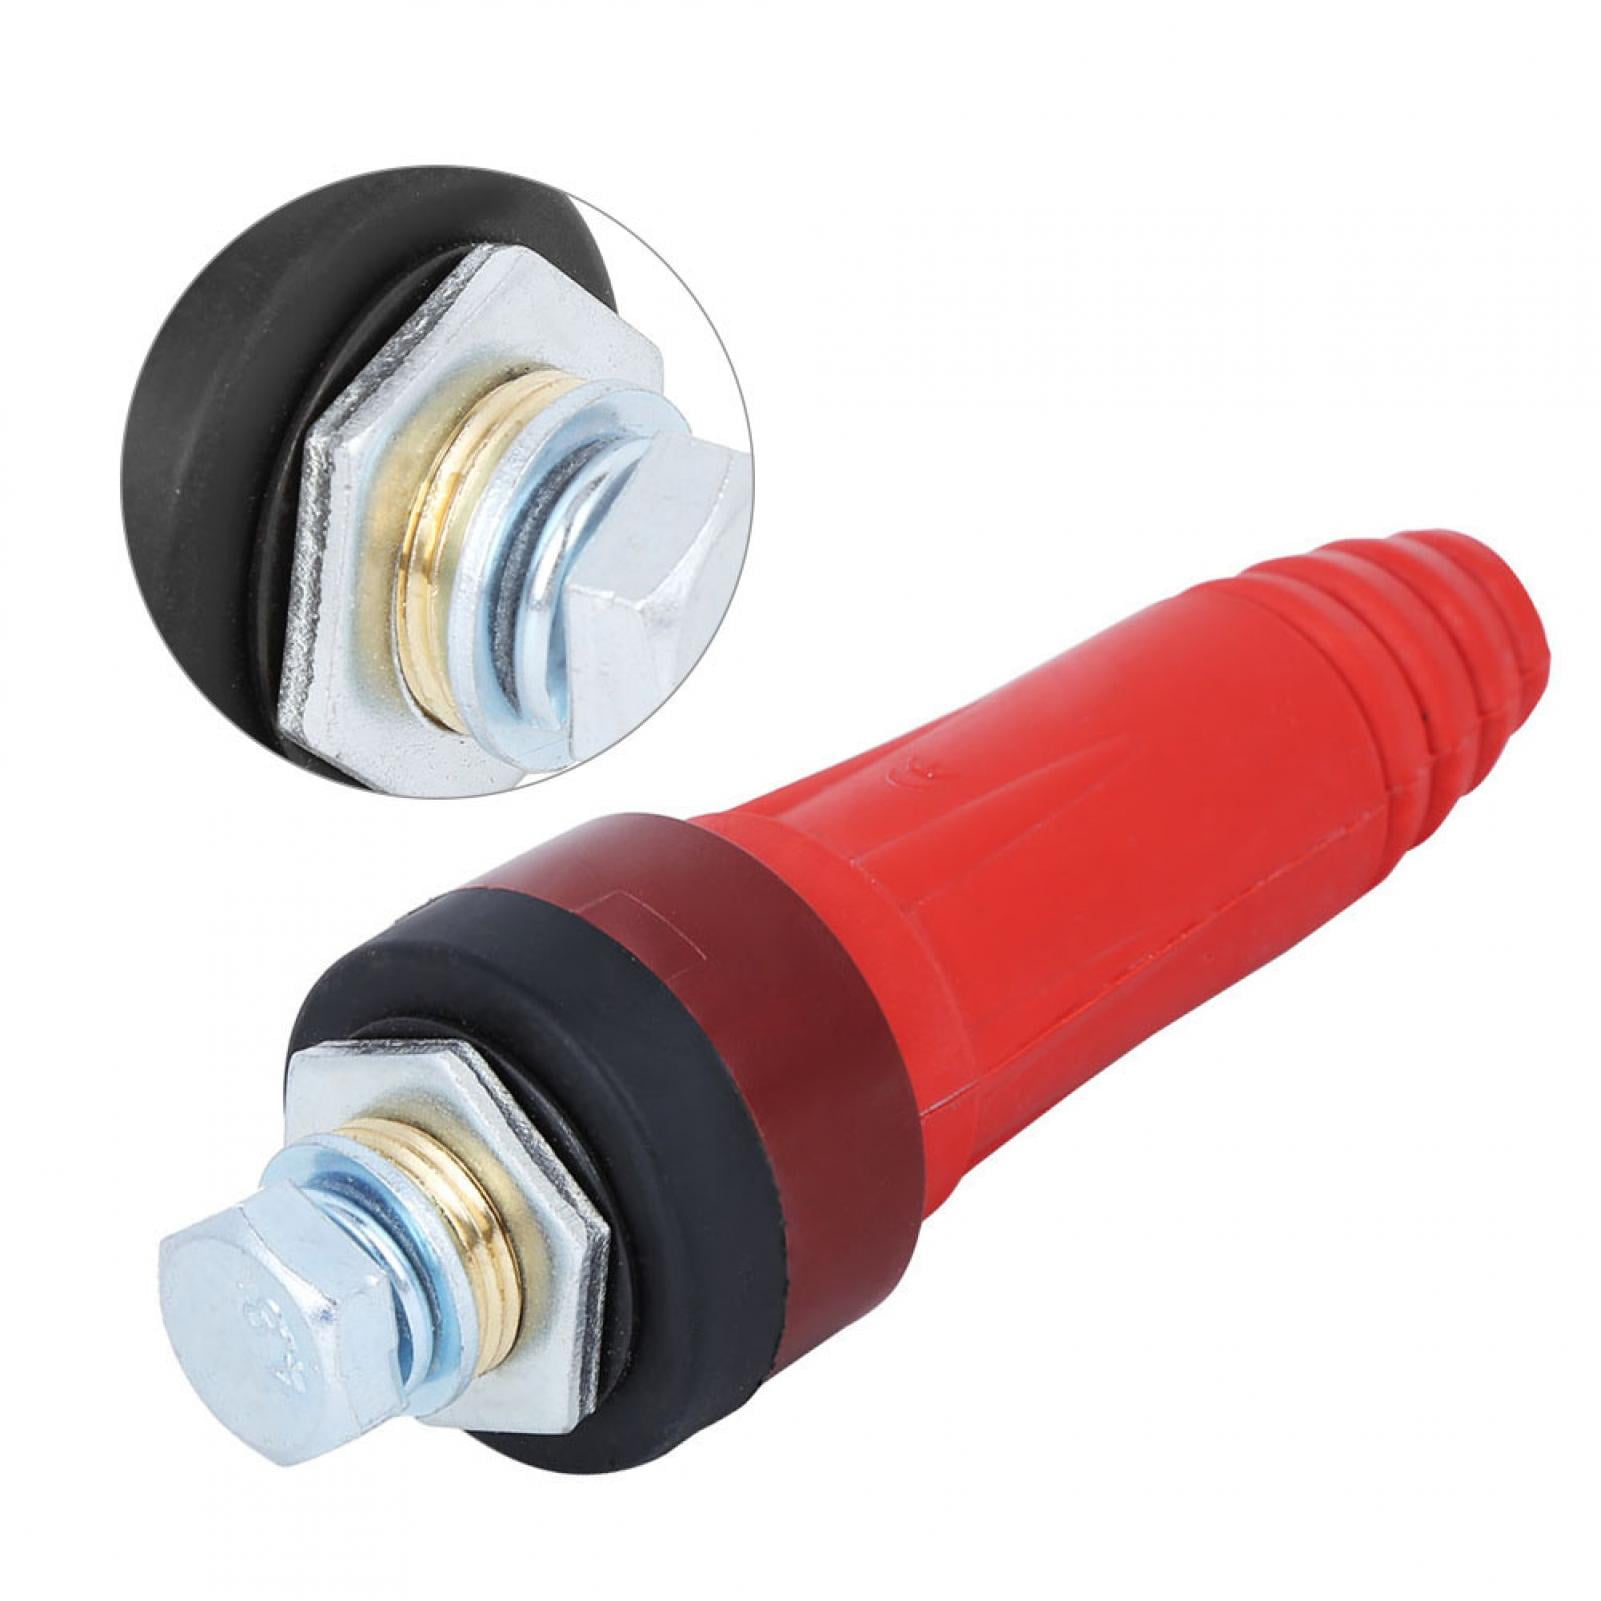 Round Type witth Good Oxidation Resistance for Electric Welding Machine Welding Cable Connectors 5pcs 35-50 Square Quick Connectors Red Cable Joint European Connecting Welding Long 